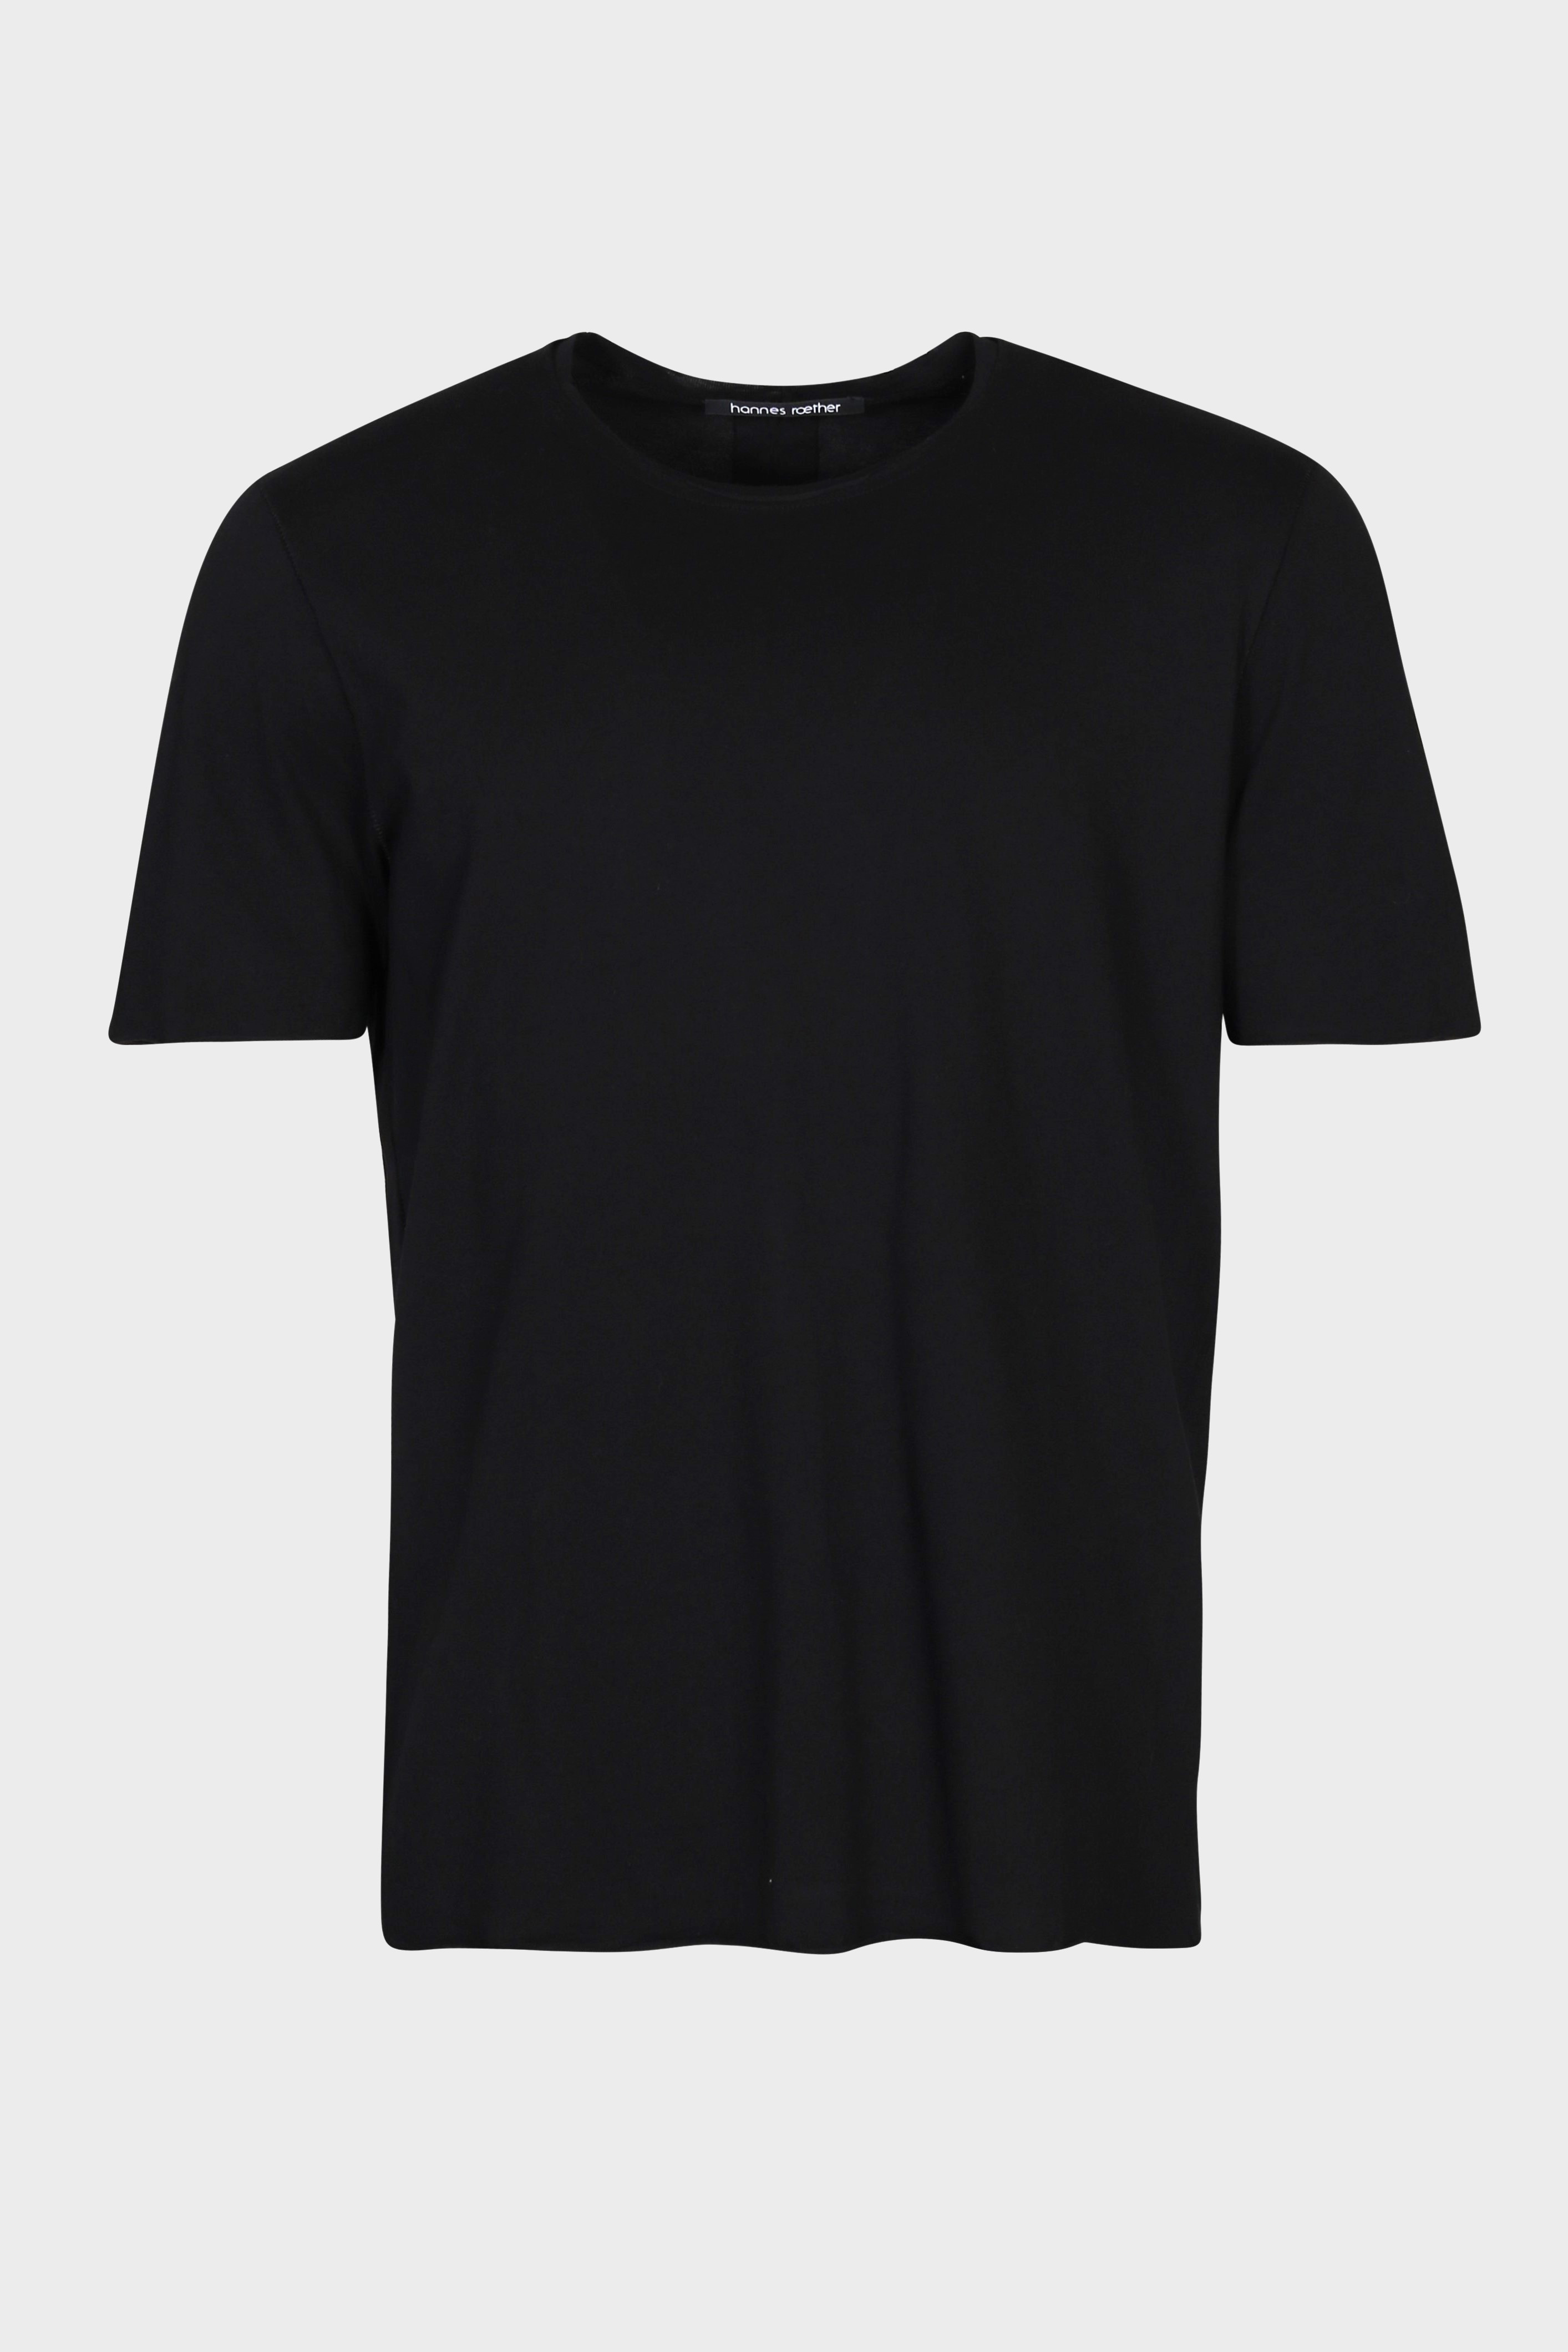 HANNES ROETHER T-Shirt in Black M